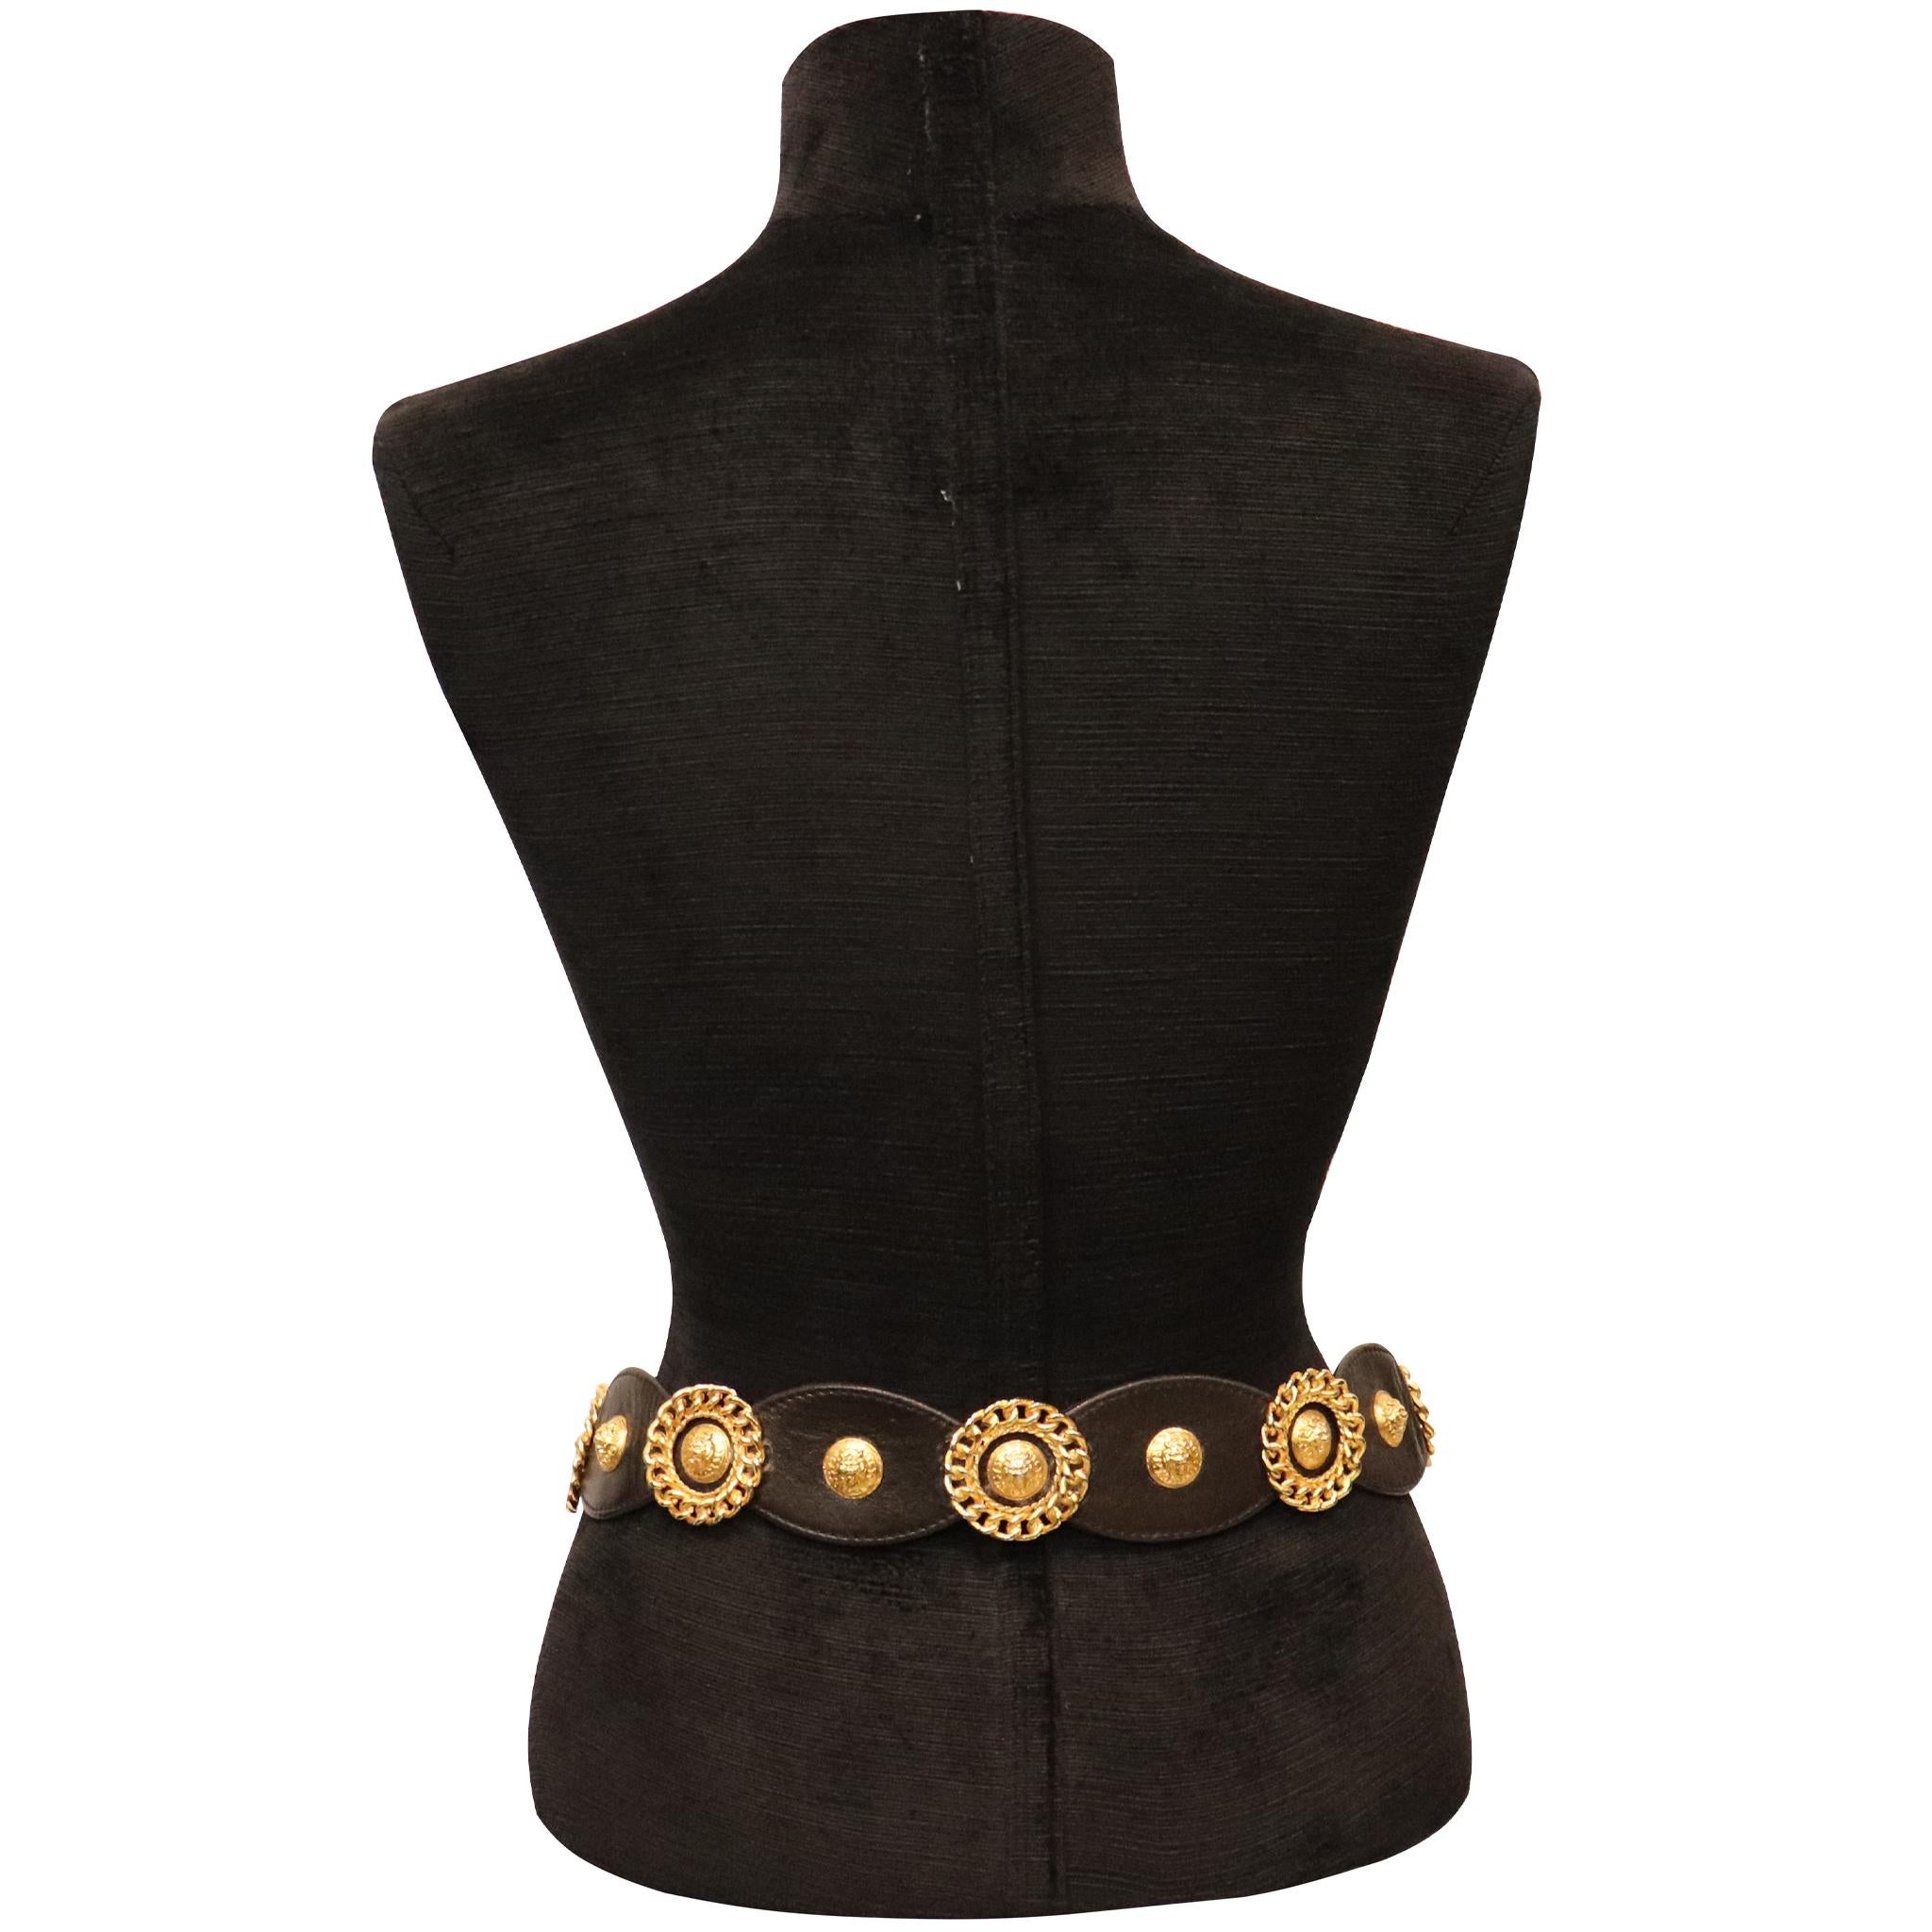 Jean L'Insolite Black Leather W/ Gold Accents Belt  In Excellent Condition For Sale In Los Angeles, CA